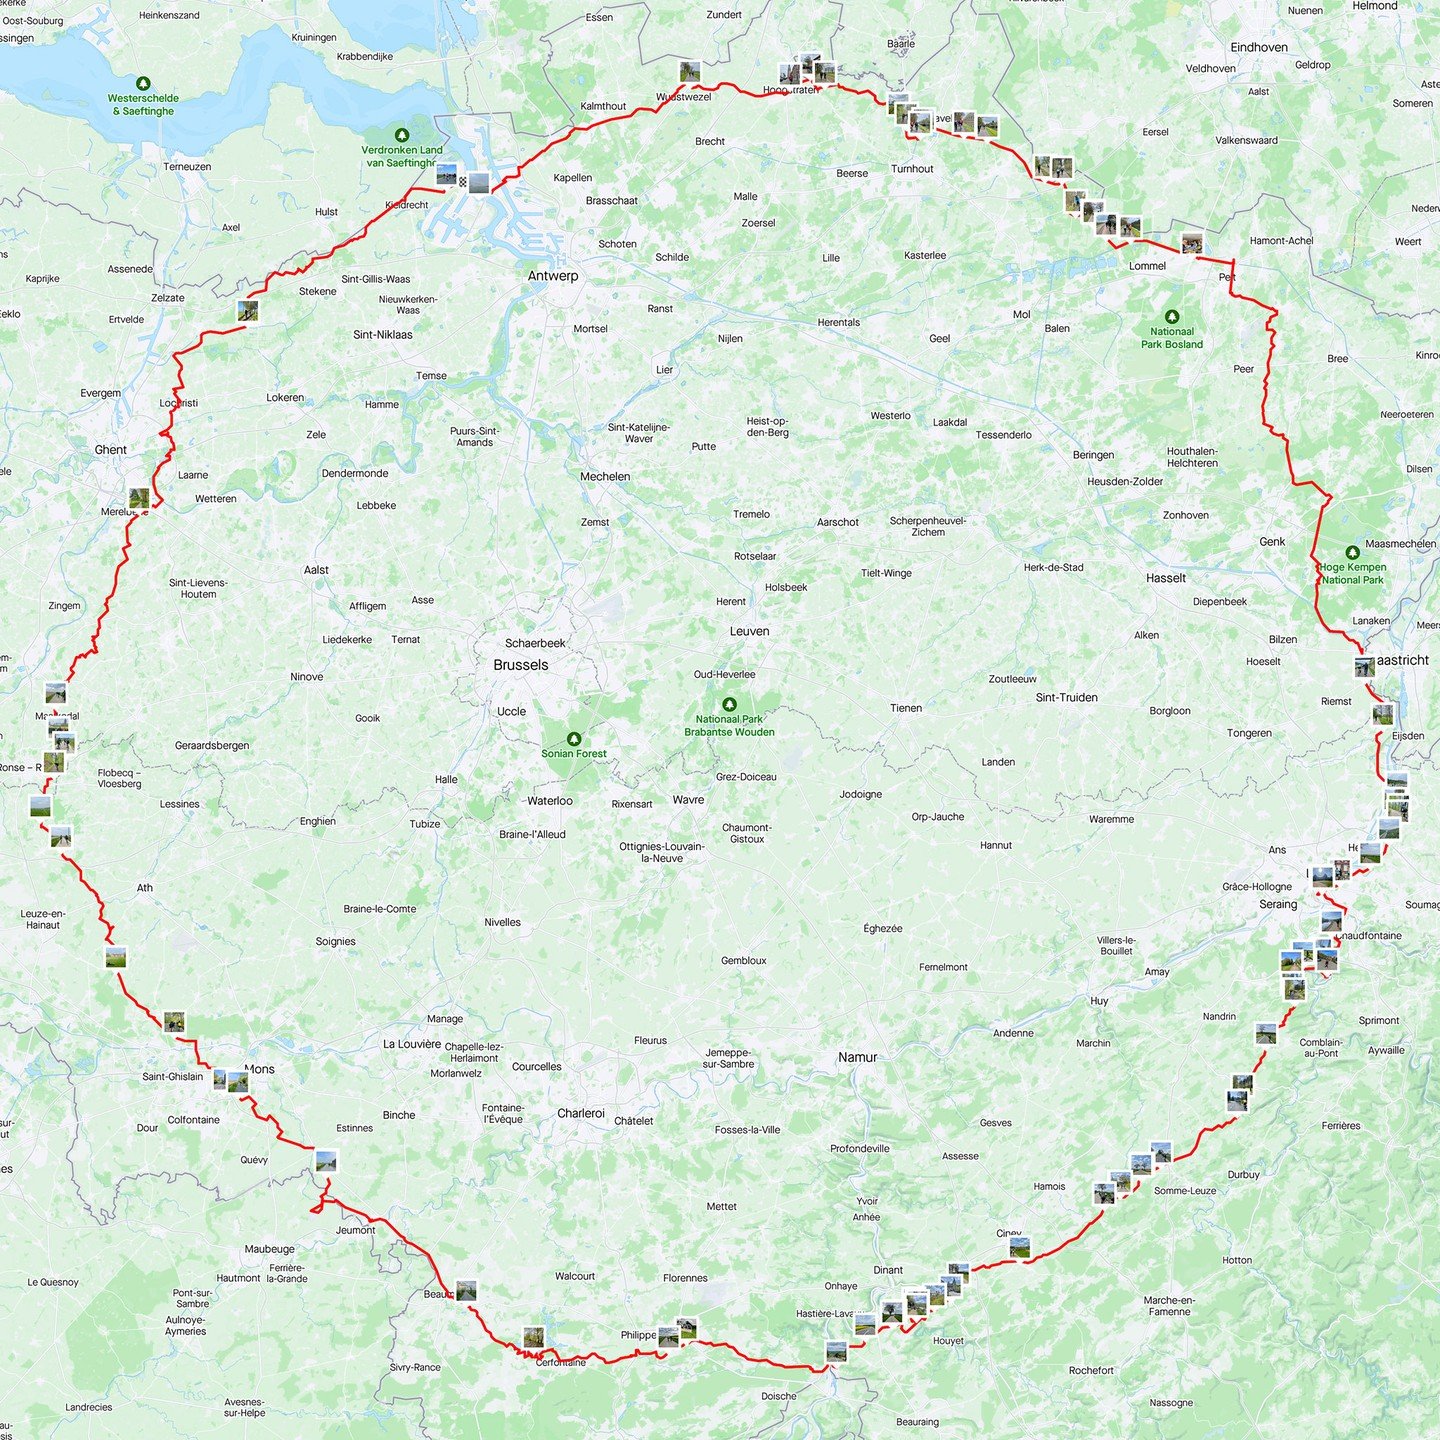 It looks like riding massive circles in Belgium is fast becoming a national sport ⃝ 🤔 🇧🇪 ⃝

Last week we had a 232km sportive covering the west of Belgium... this week we have a 573km mega-loop covering the east of Belgium 🤯

@mauritsdepreter and